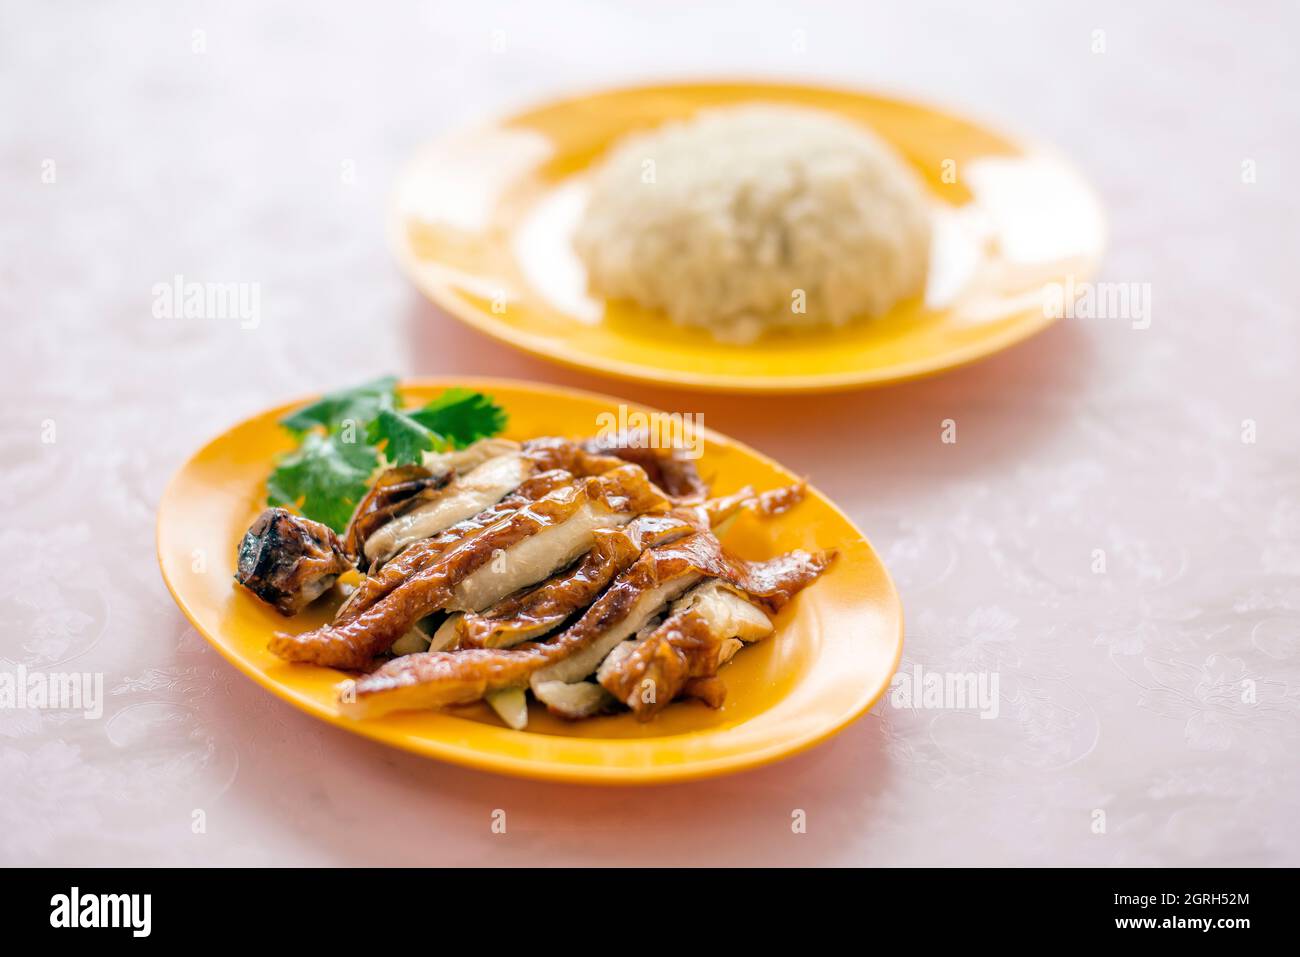 Close-up Of Meal Served On Table Stock Photo